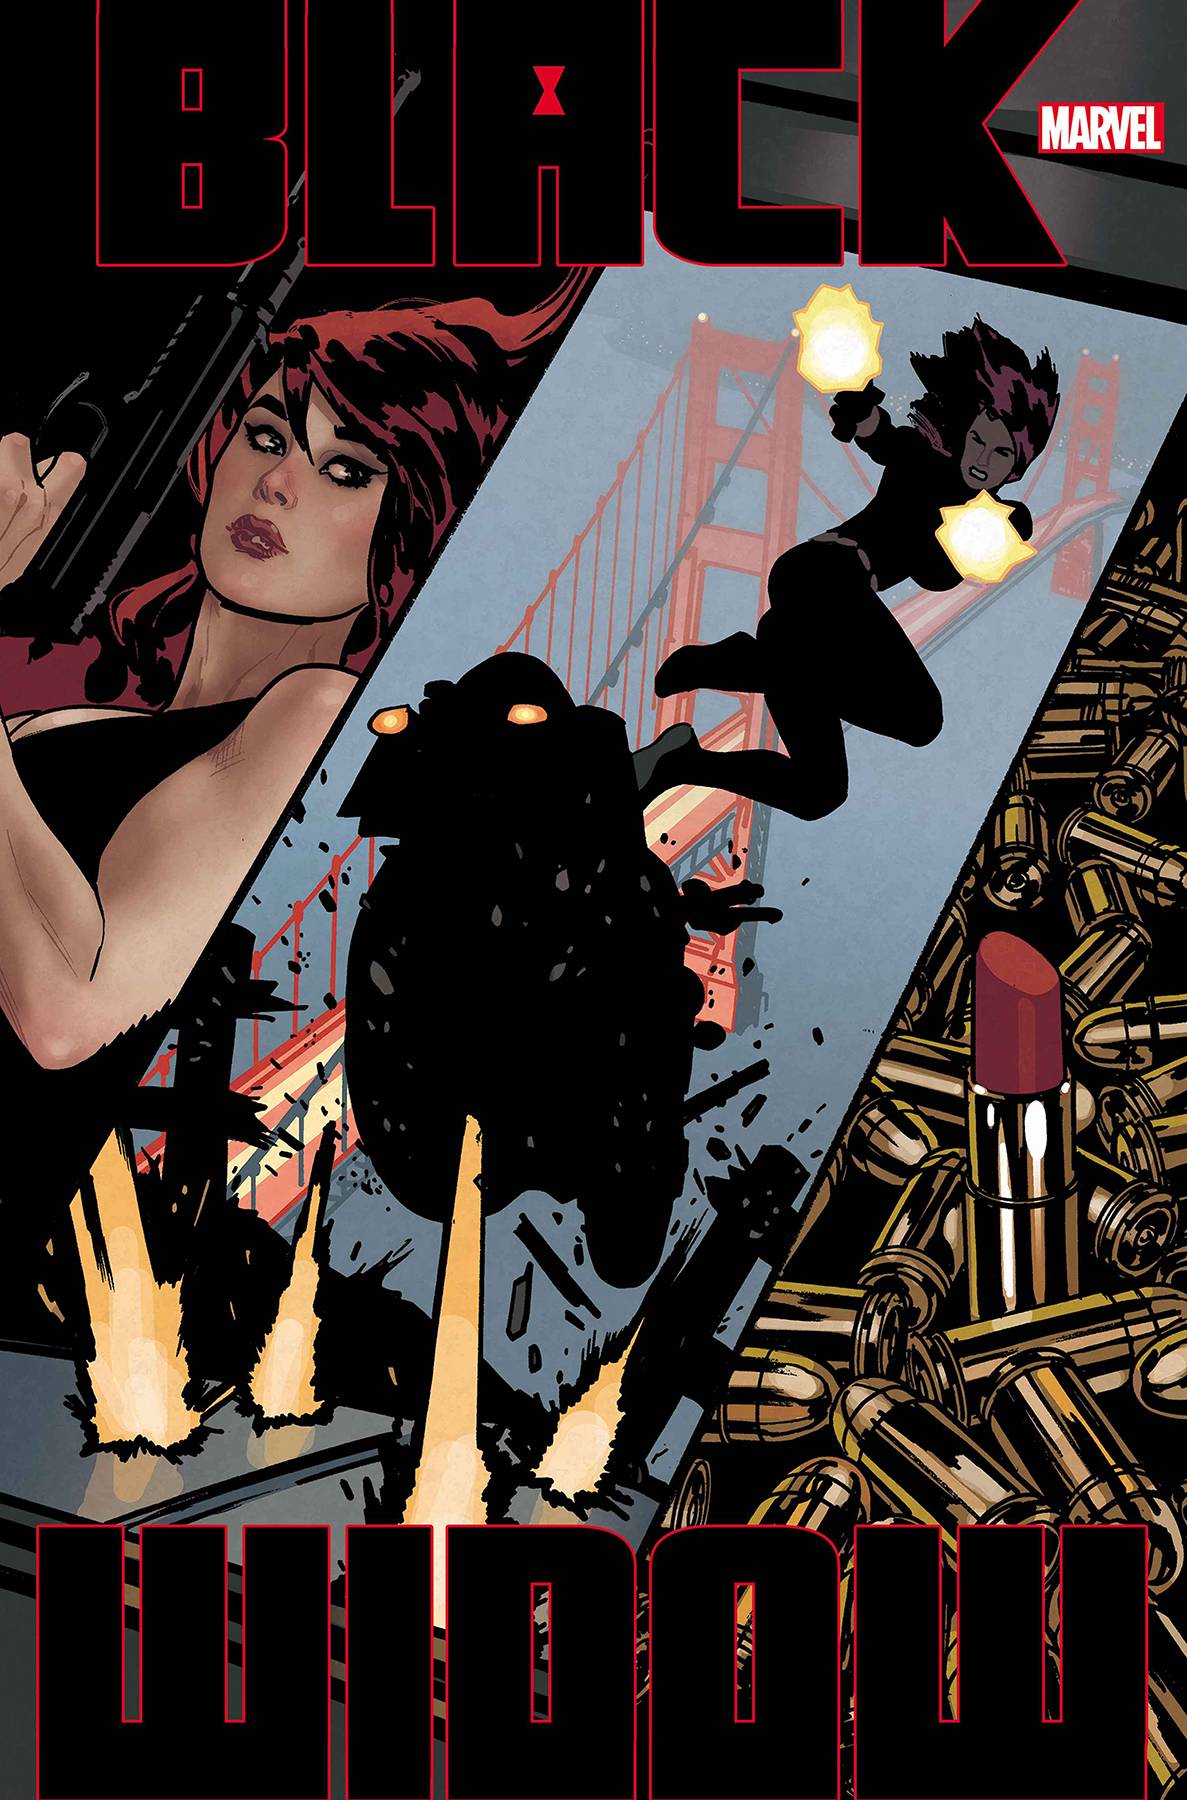 BLACK WIDOW #2 | Game Master's Emporium (The New GME)